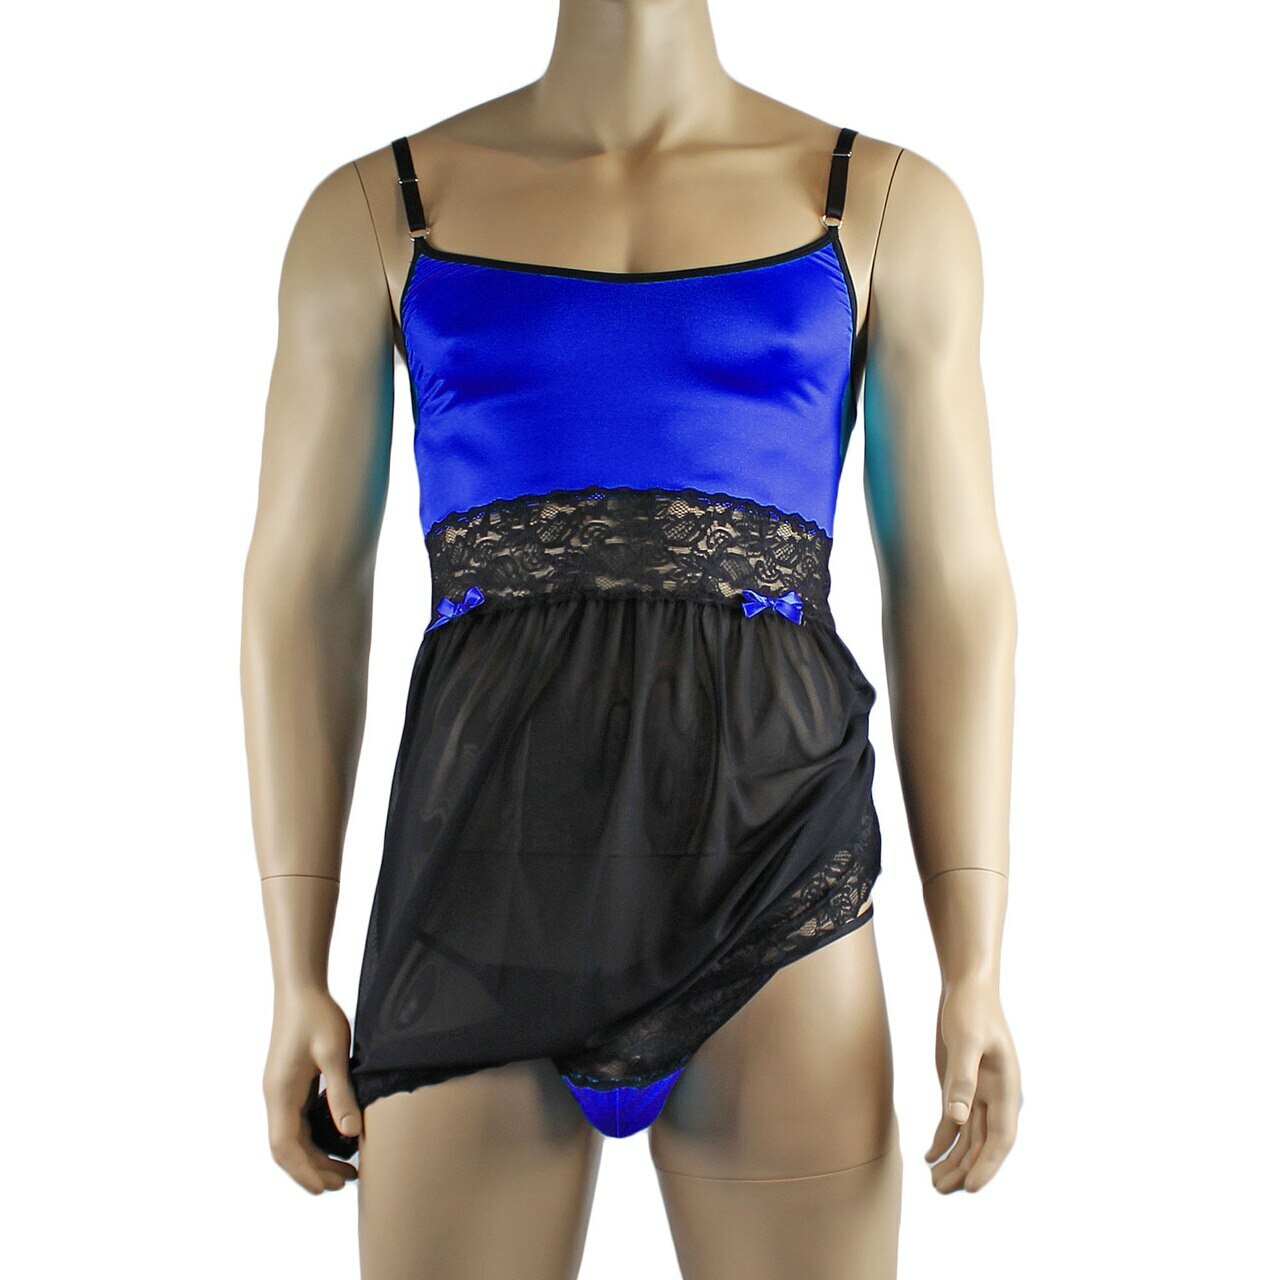 Mens Joanne Sexy Lingerie Nightwear Chemise with G string - Sizes up to 3XL Blue & Black